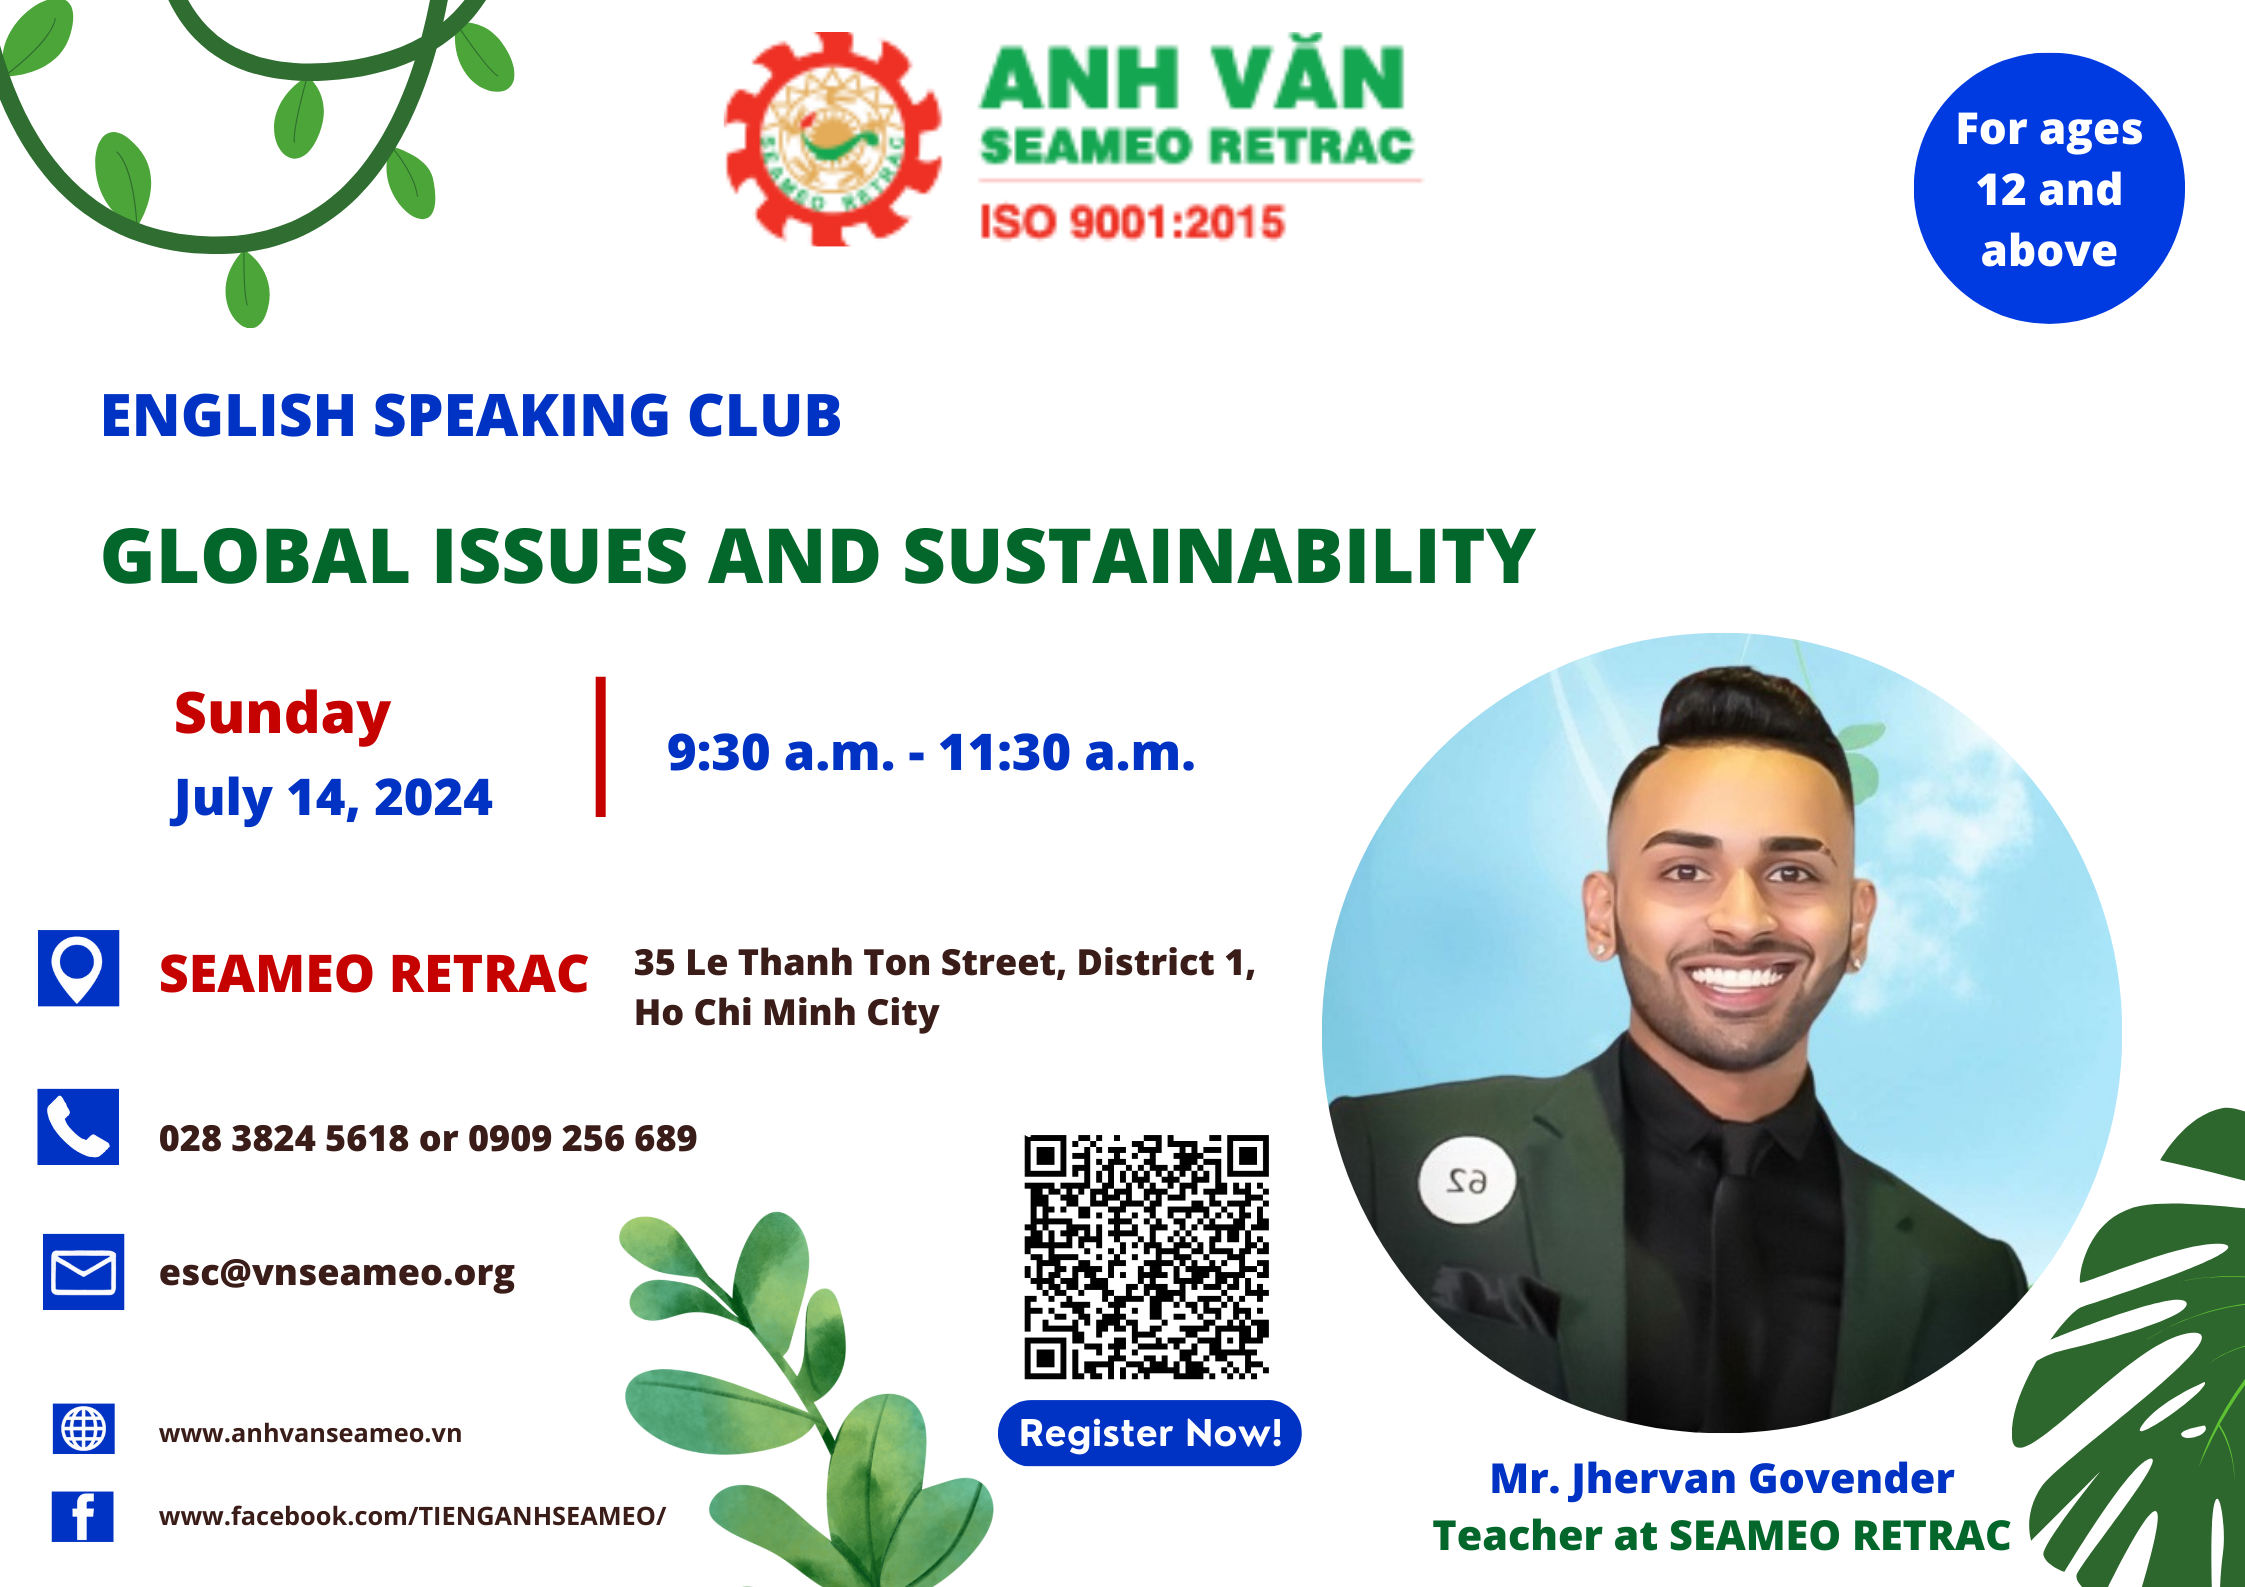 English Speaking Club: “Global Issues and Sustainability”